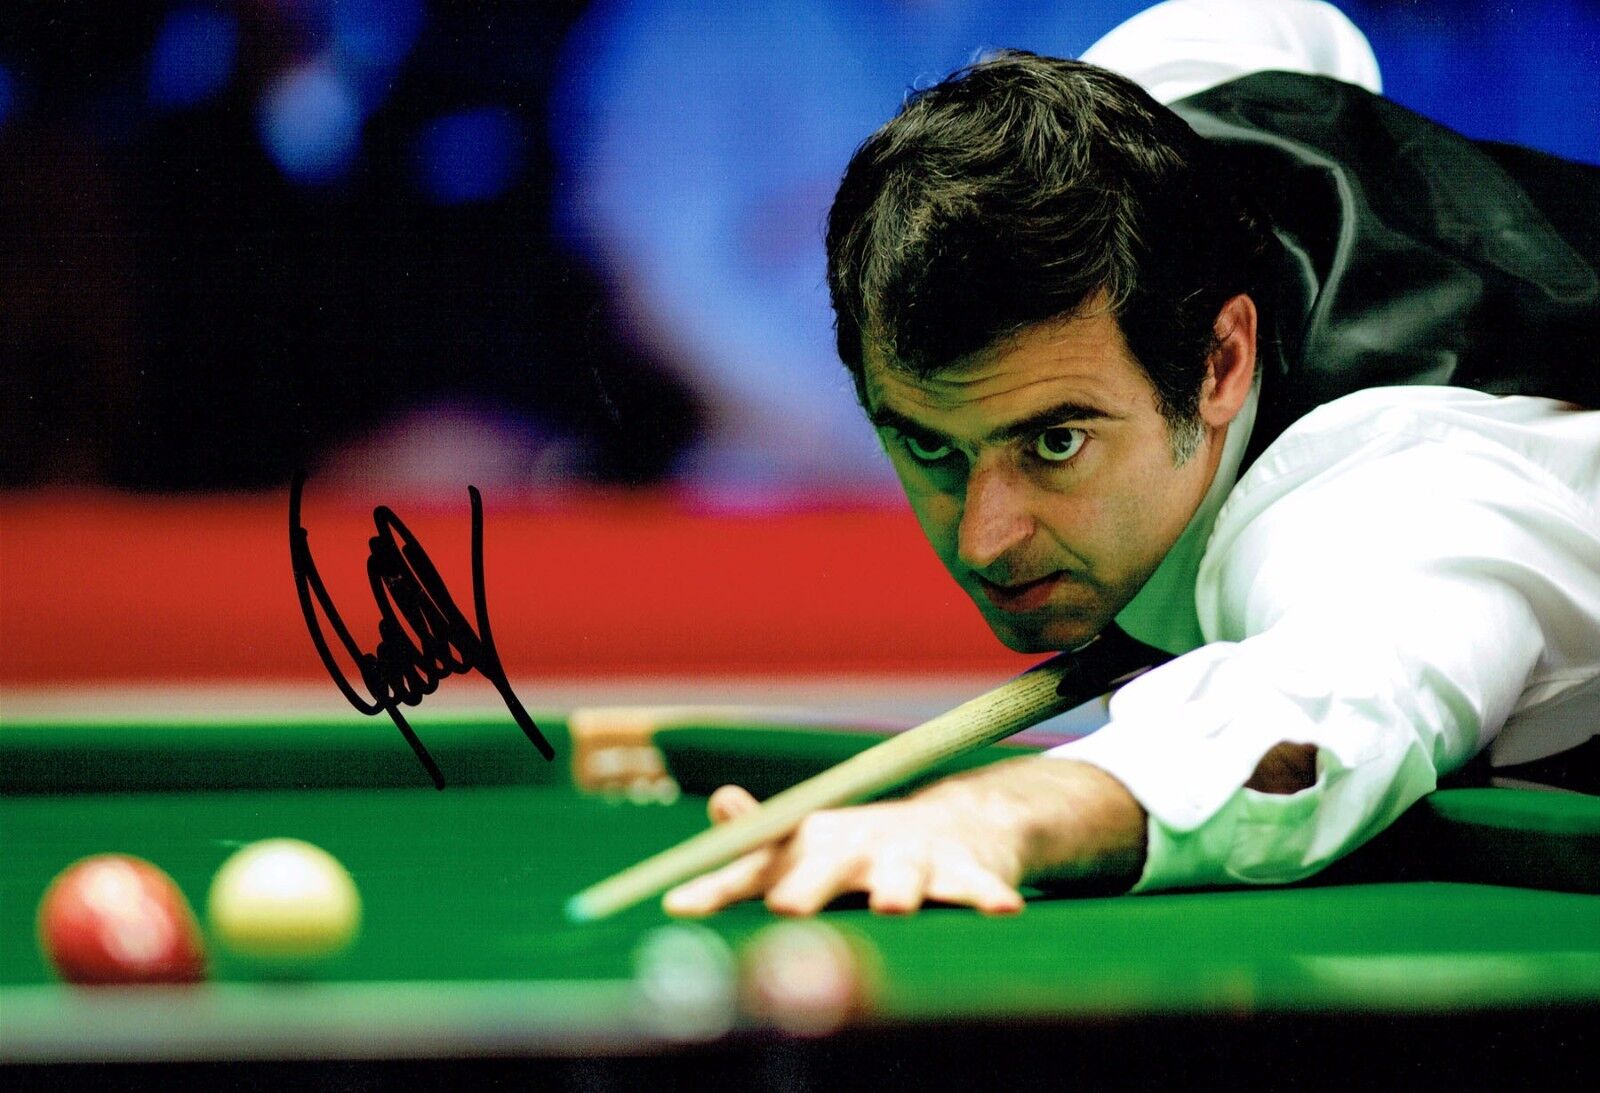 Ronnie O'SULLIVAN 2016 SIGNED Autograph 12x8 Photo Poster painting B AFTAL COA Snooker Champion